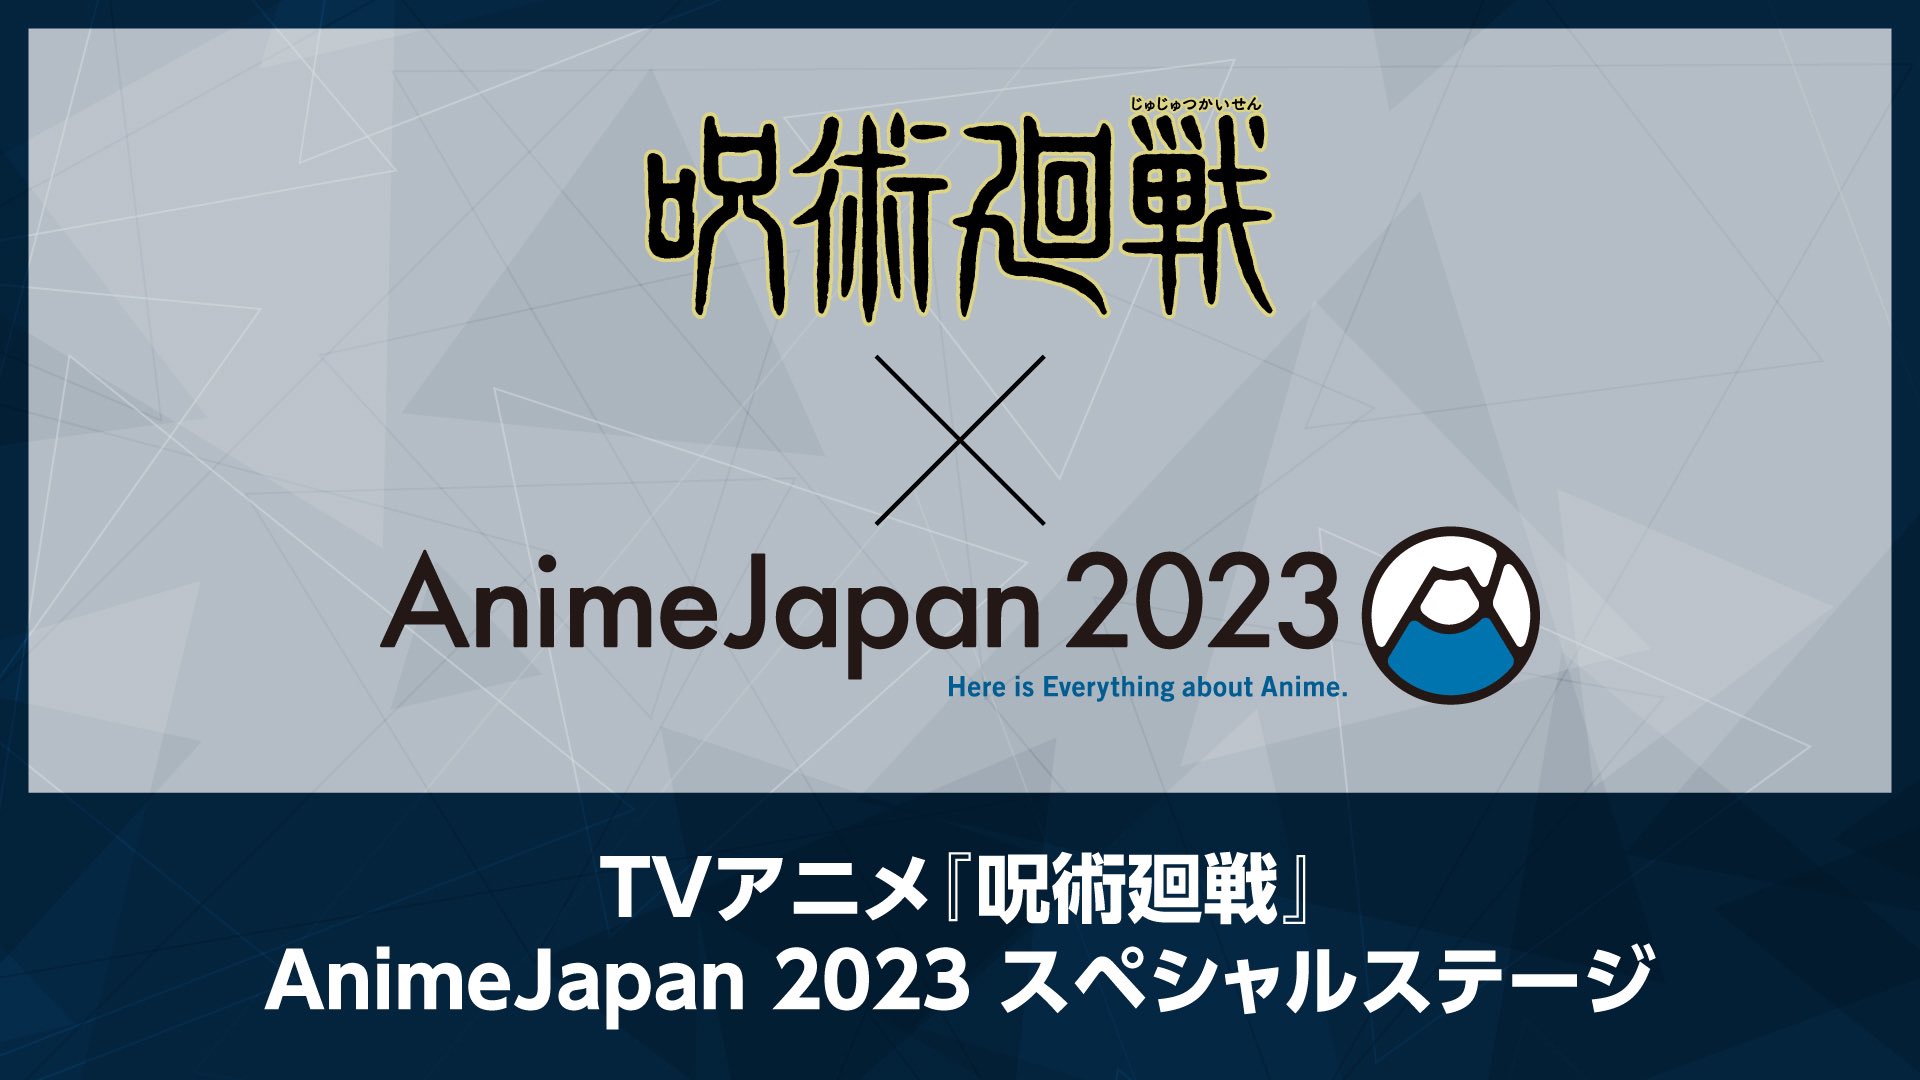 Anime Japan 2023 Shares Schedule, Streaming Info